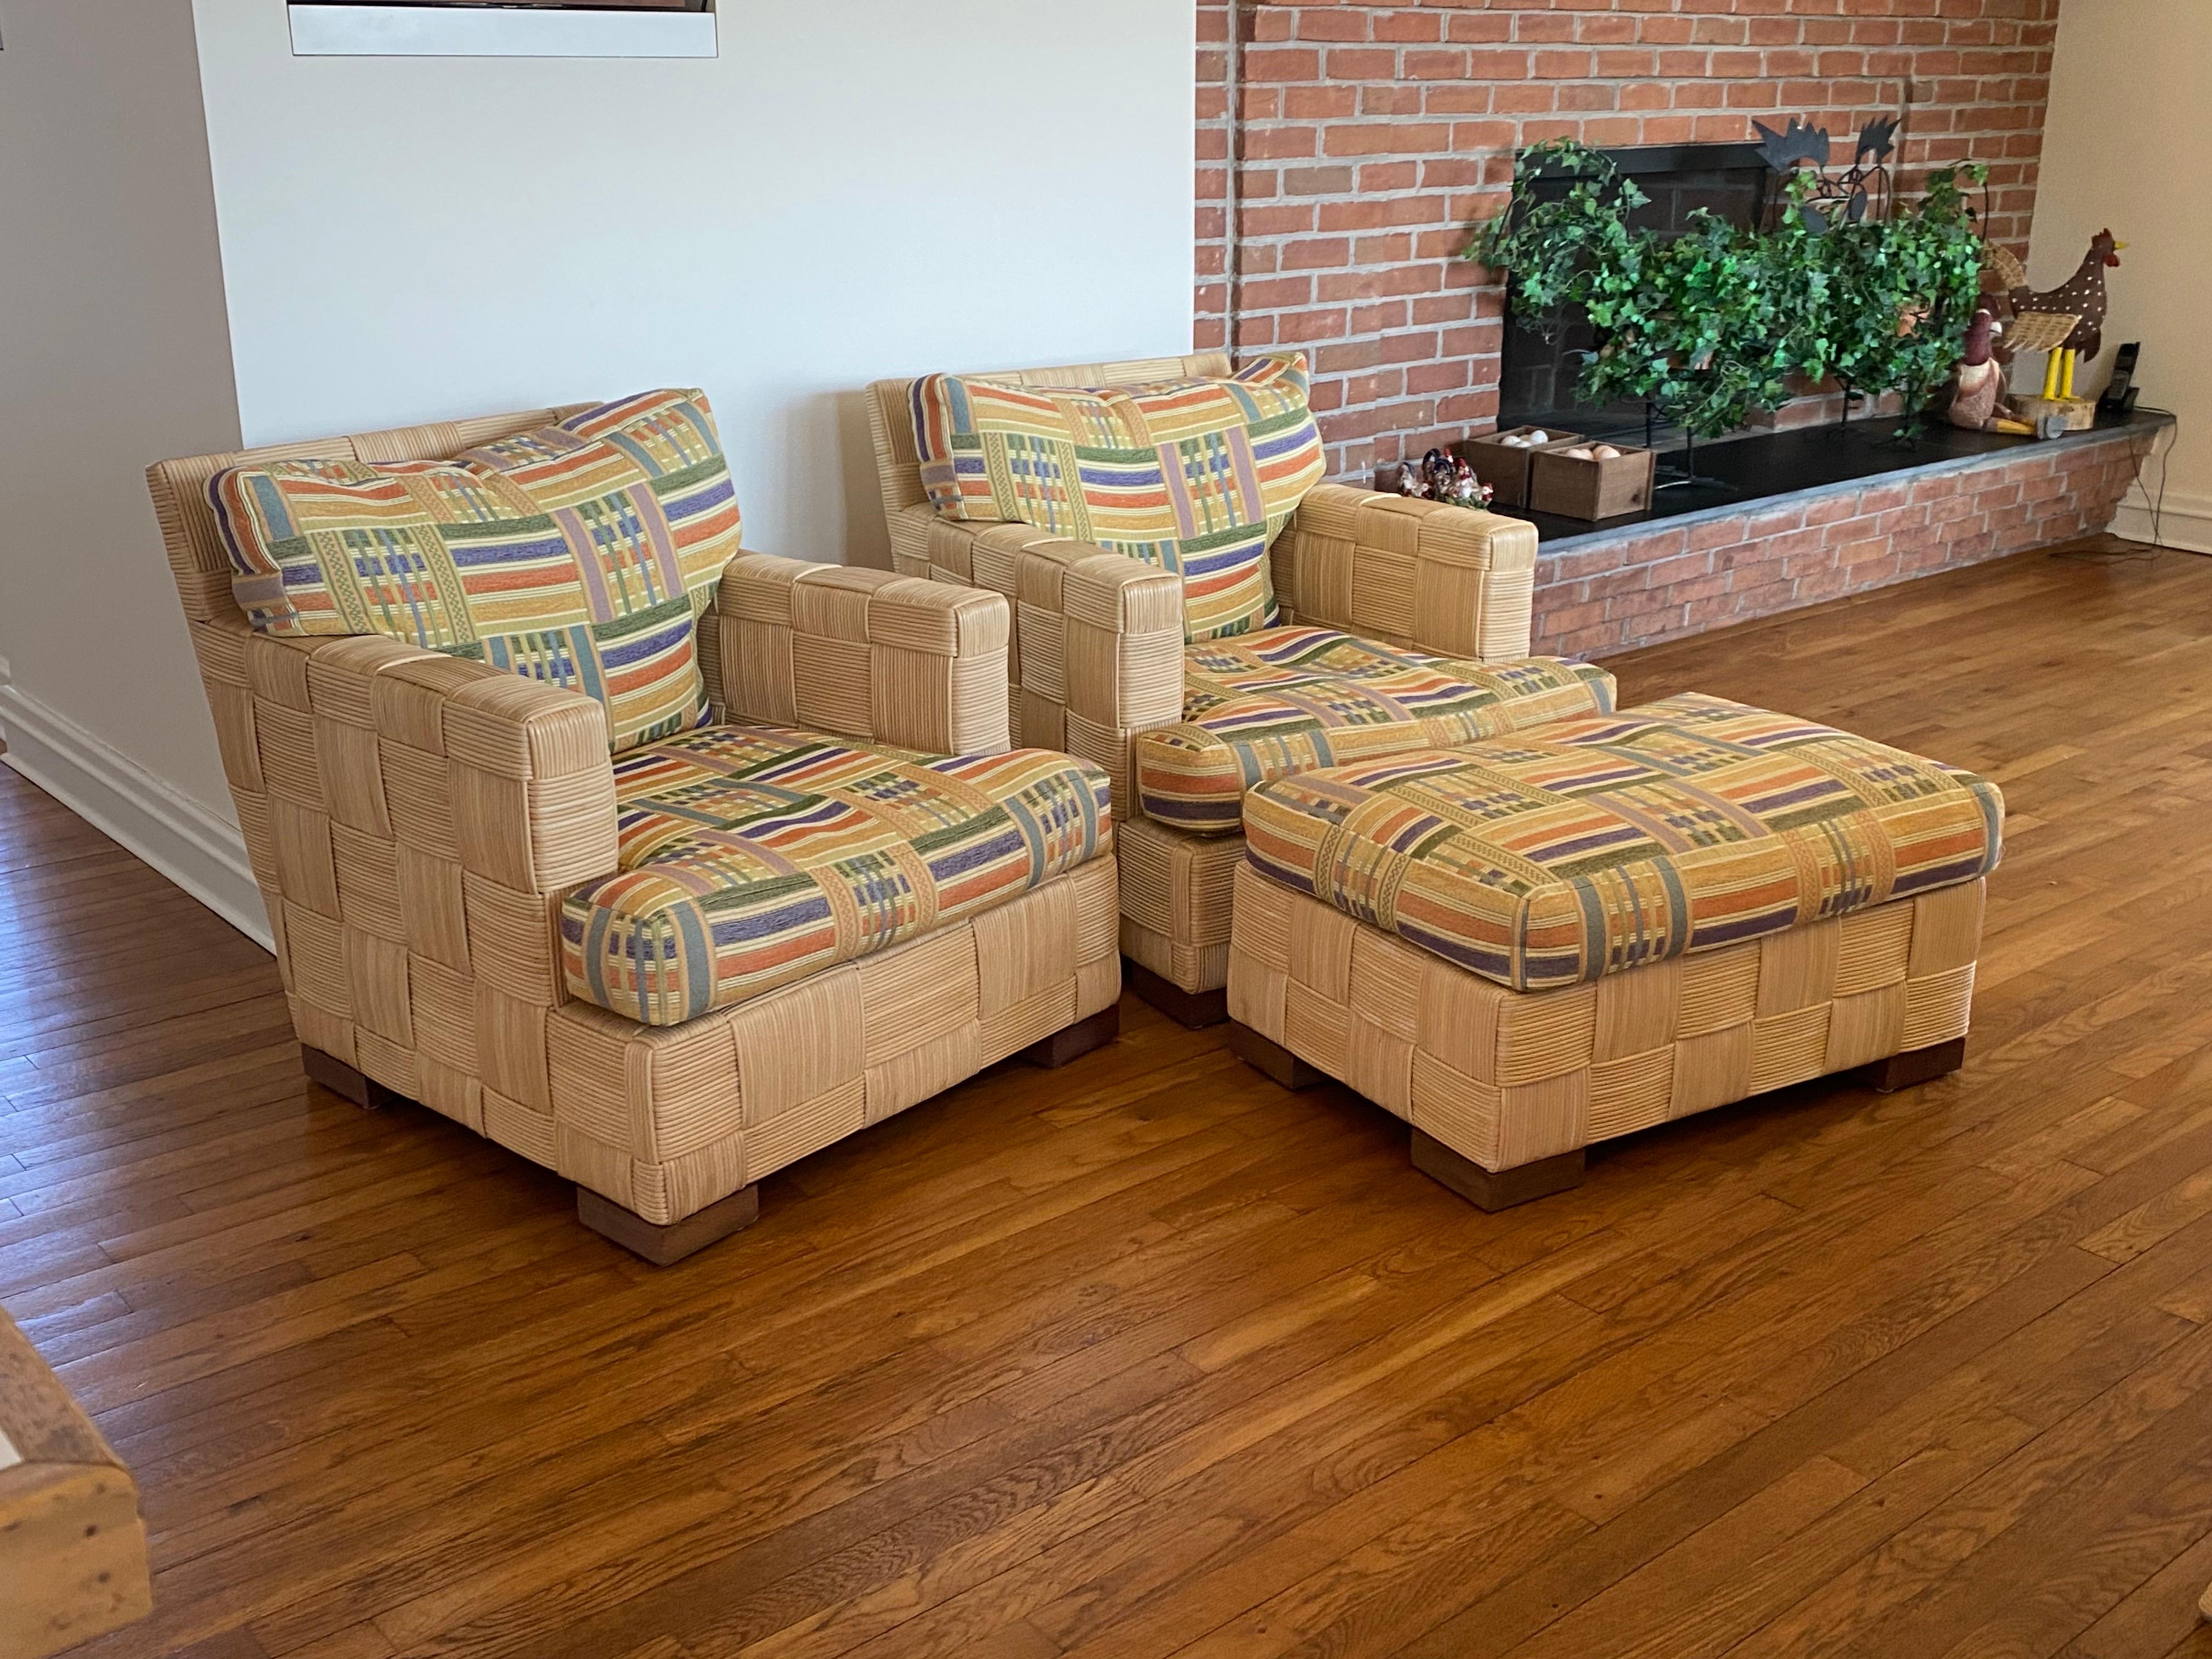 American Pair Block Island Cane Club Chairs & Ottoman by John Hutton for Donghia, 1990s For Sale